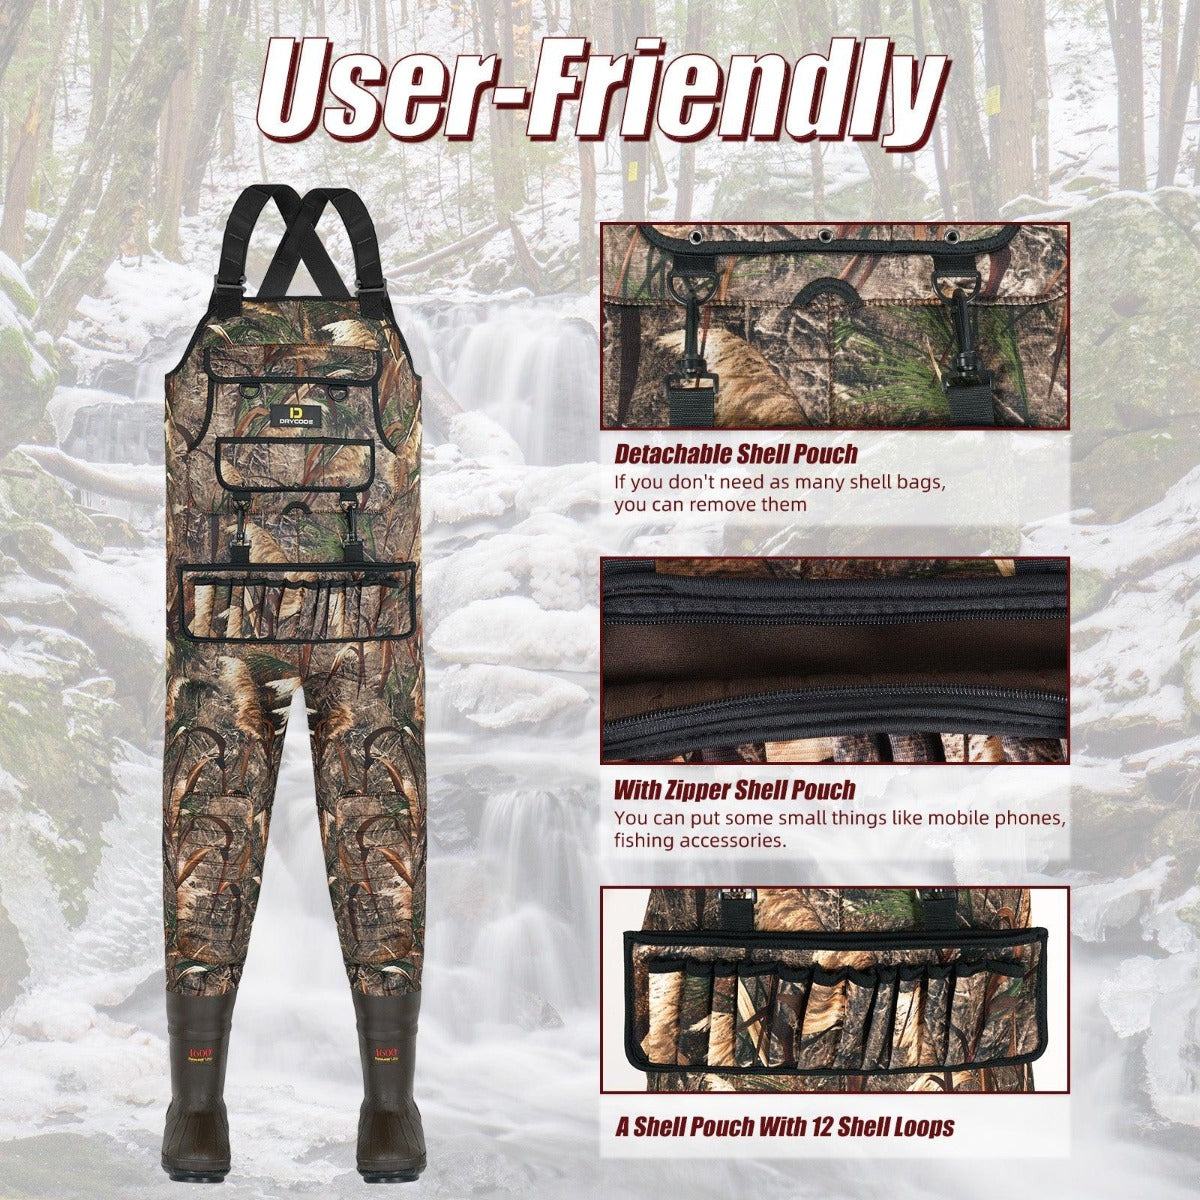 DRYCODE Chest Waders for Men with 1600g Boots, Waterproof Fleece-Lined  Insulated Wader with Boot Hanger for Hunting